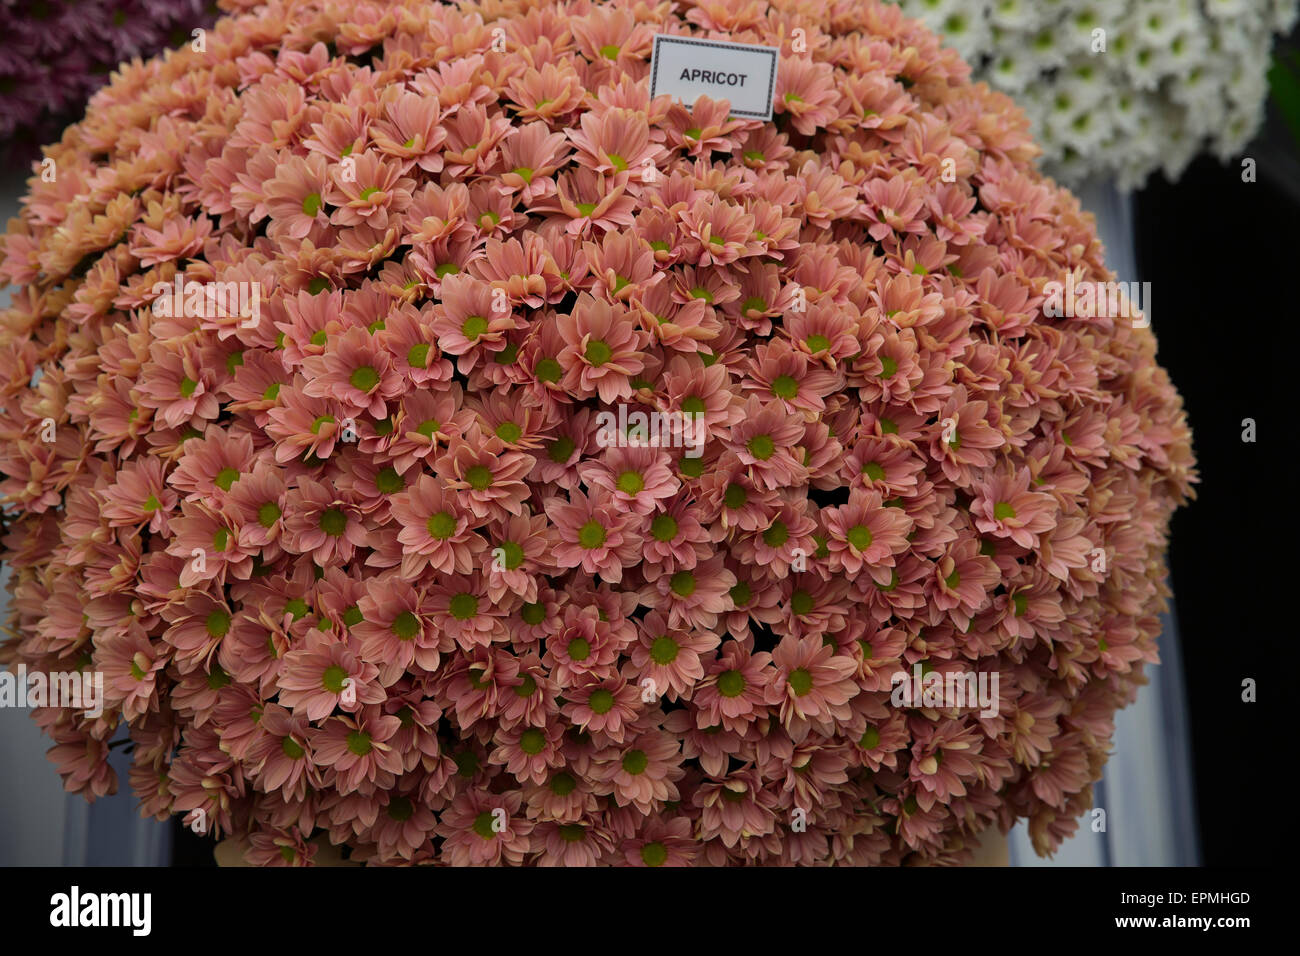 Apricot Chrysanthemums on display at Chelsea Flower Show 2015 Stock Photo